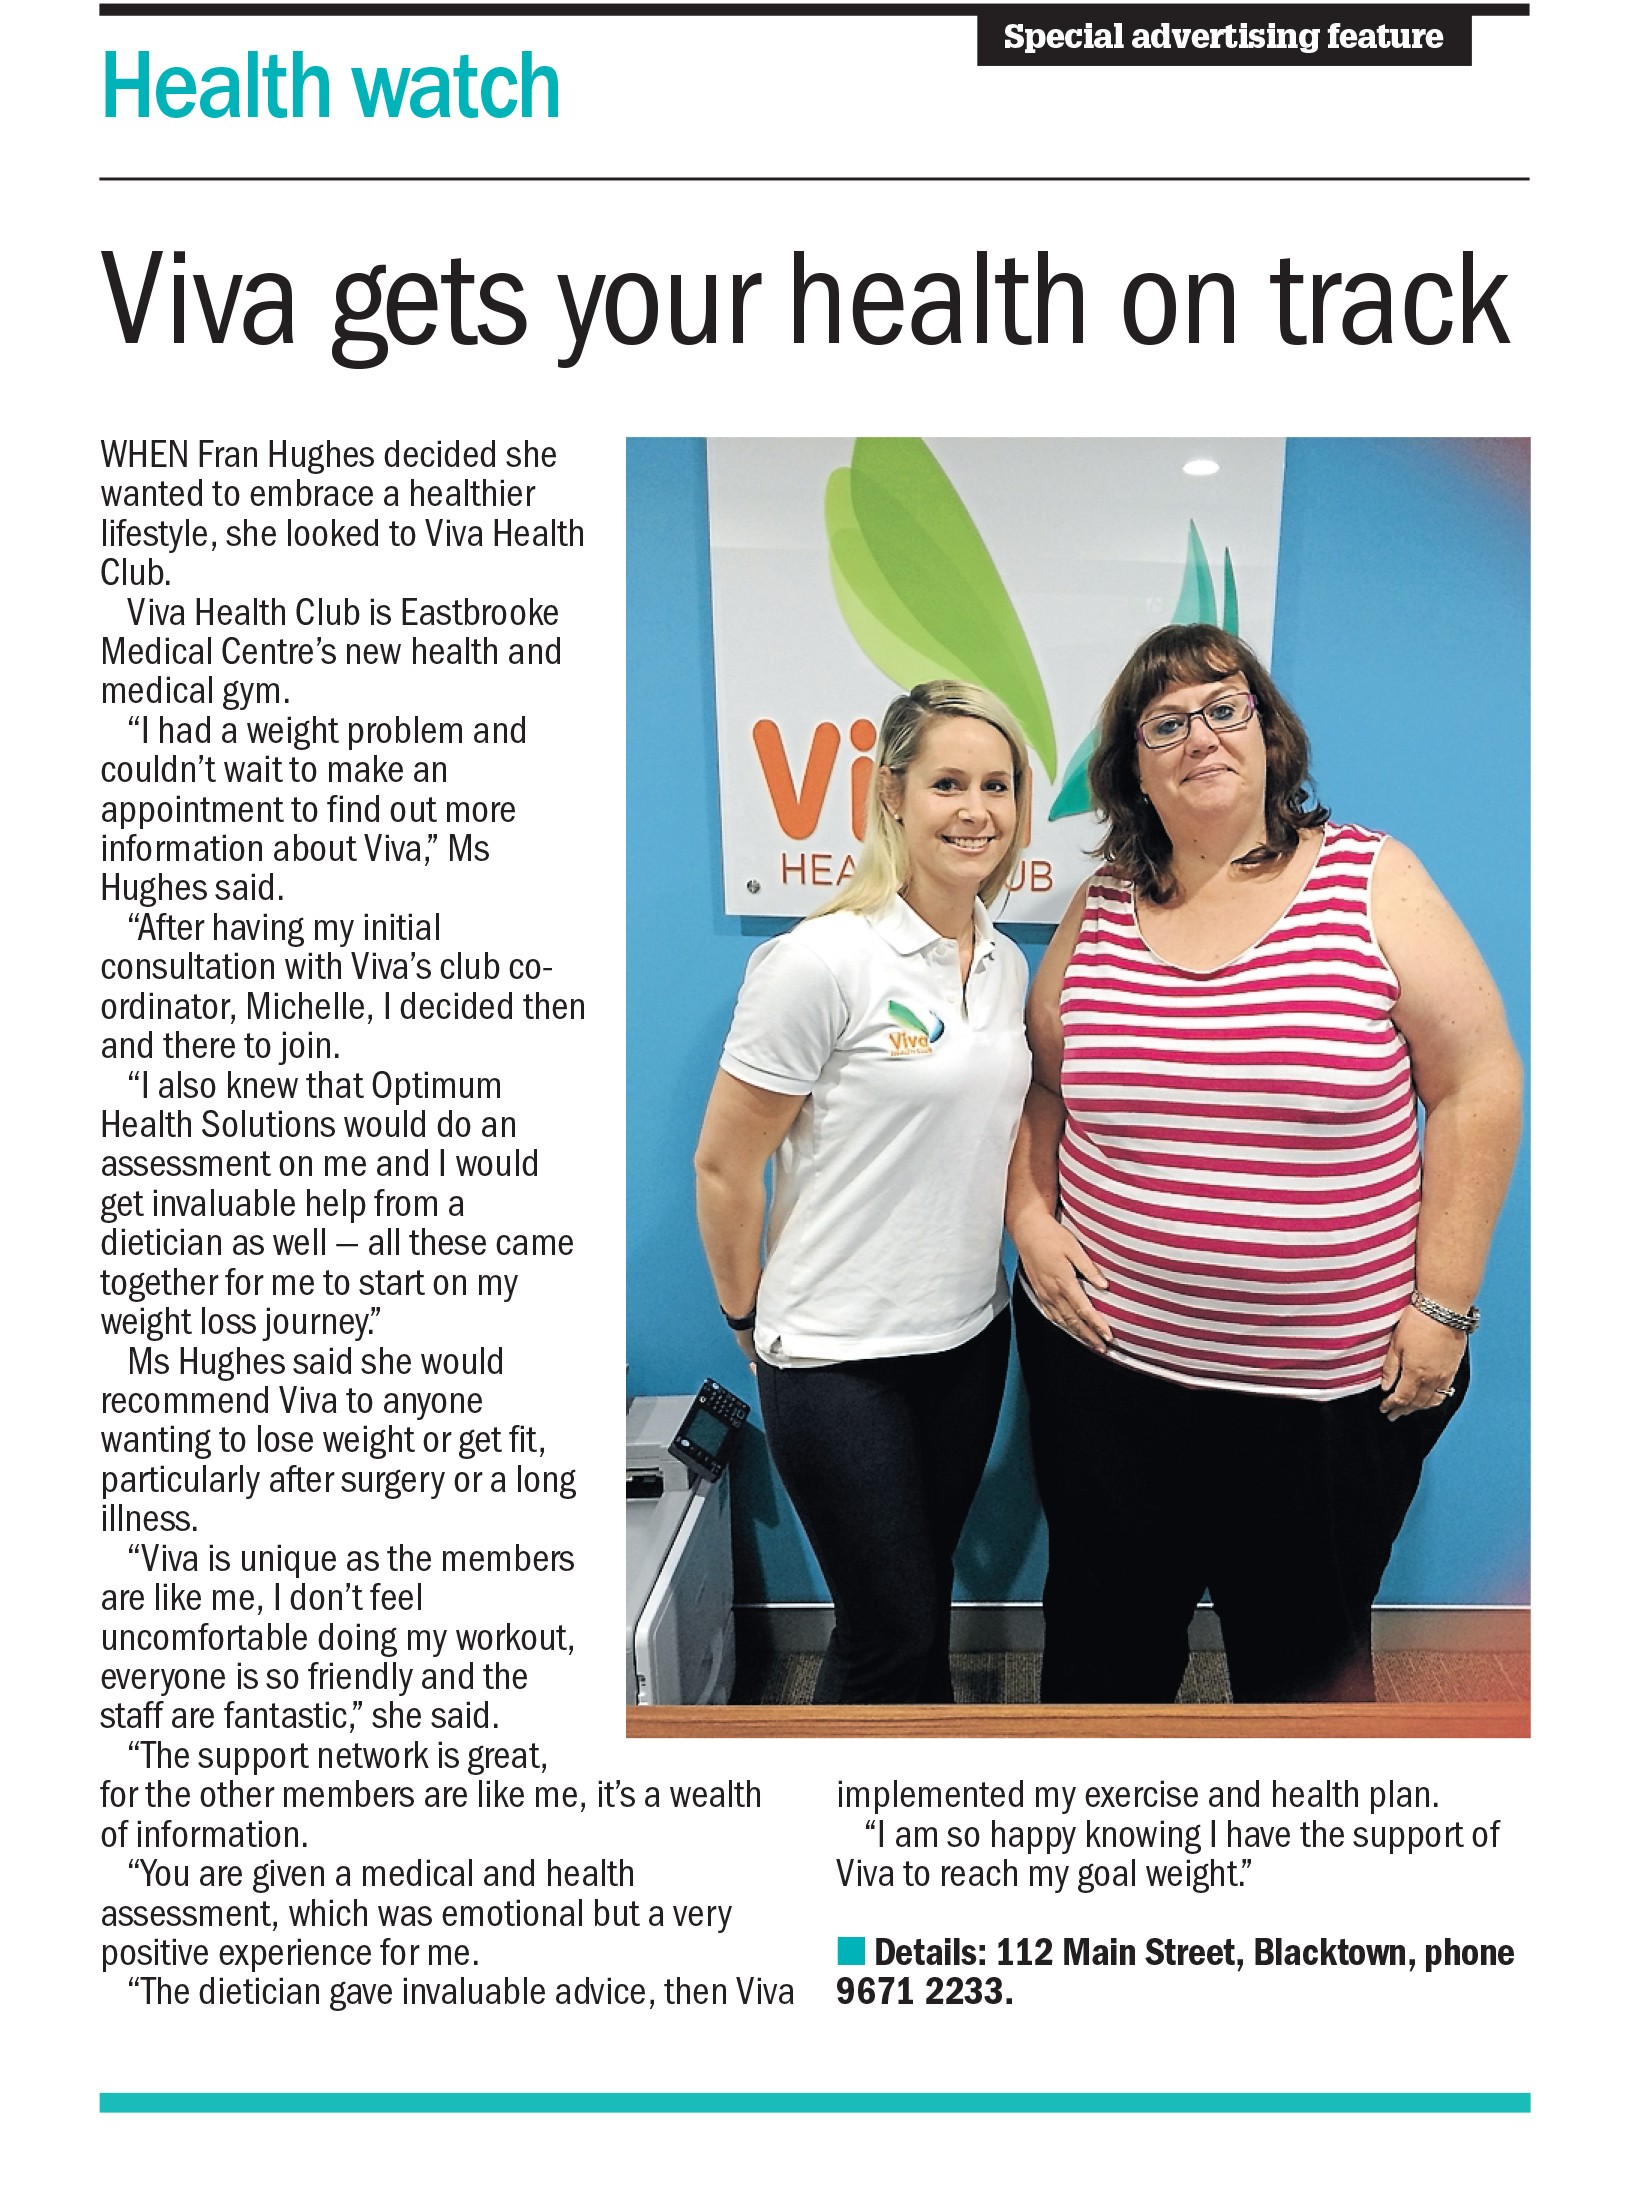 Viva gets your health on track